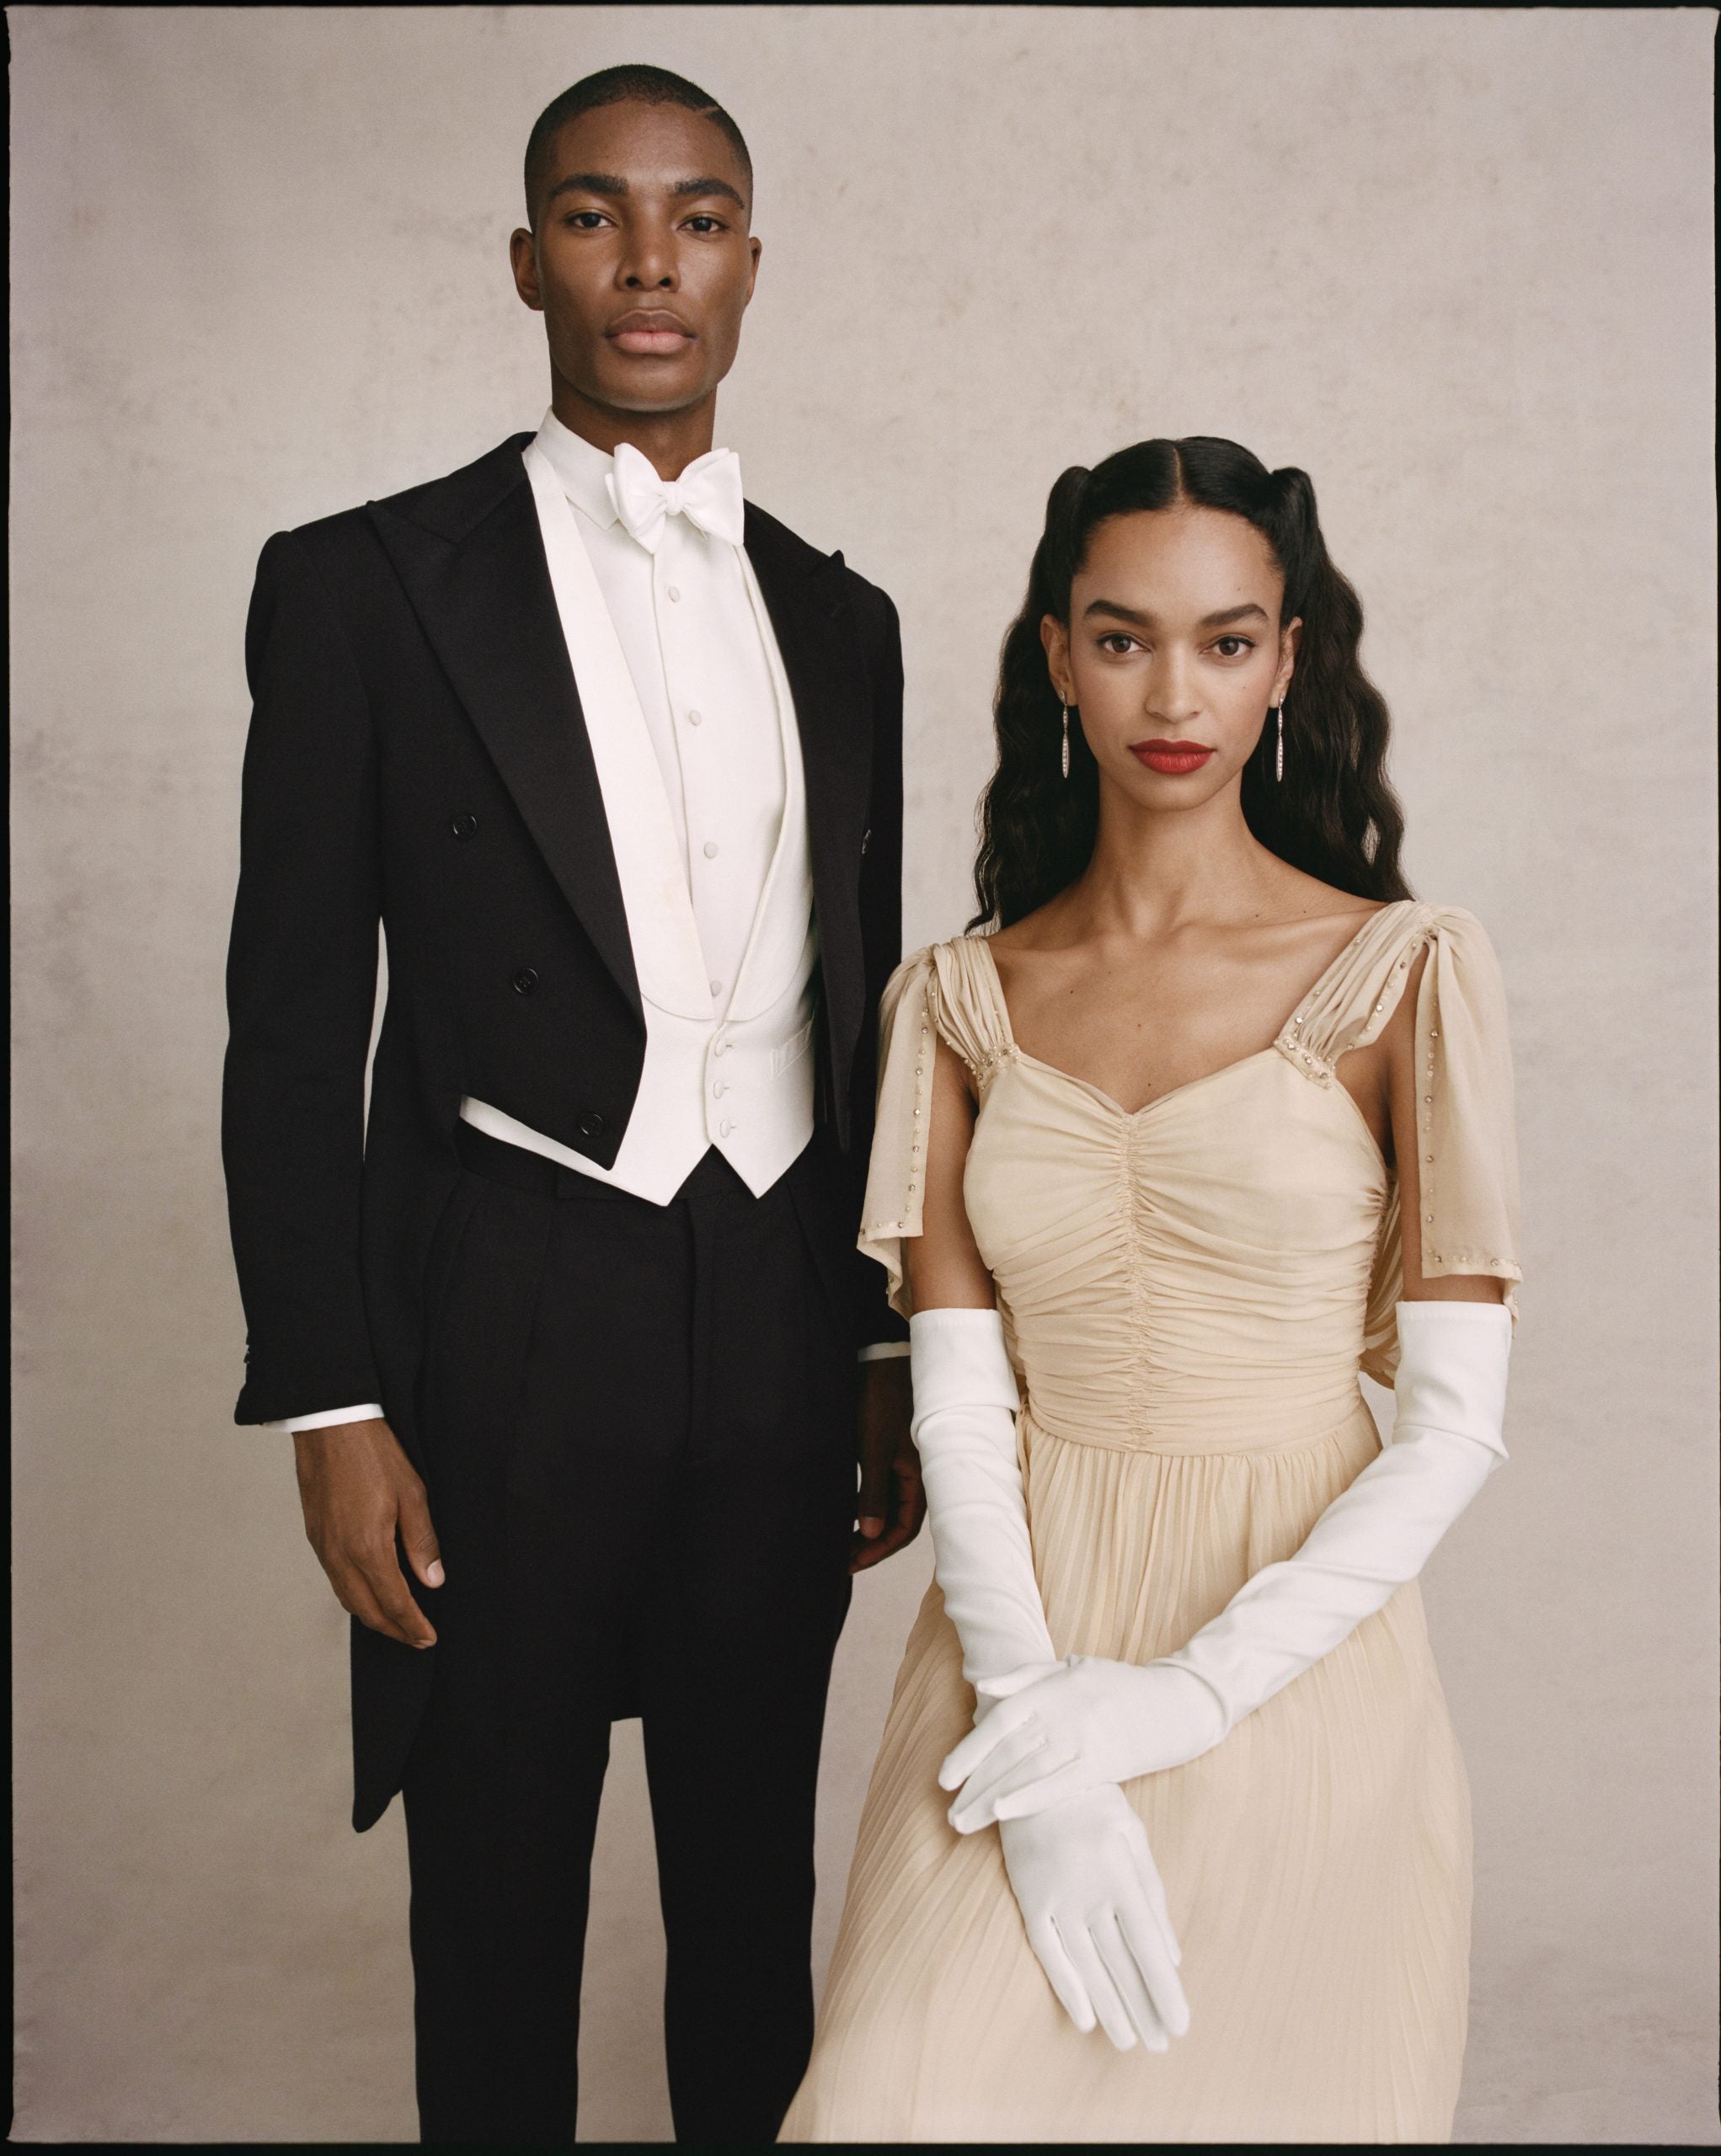 Ralph Lauren’s Collection With Morehouse And Spelman Pays Homage To The Fashion Legacies Of The Institutions